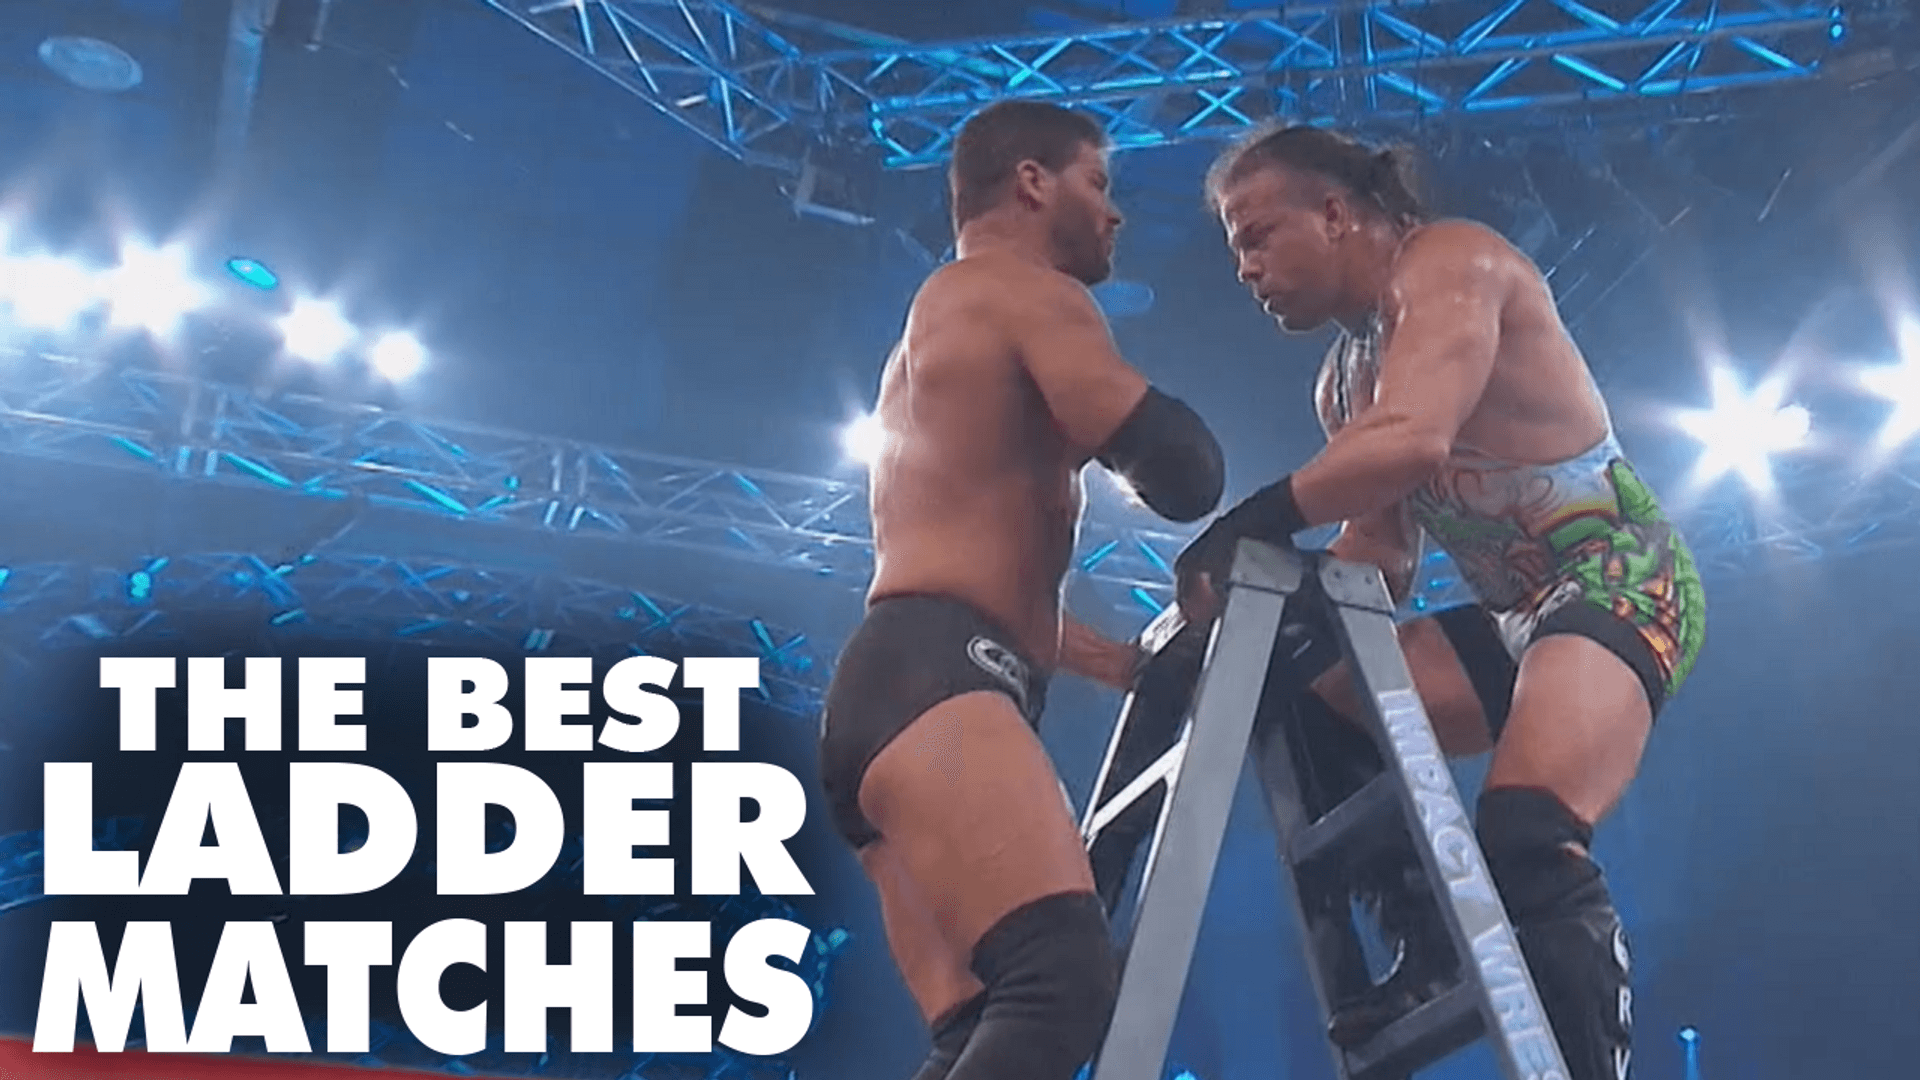 Relive The Best Ladder Matches FREE for a Limited Time on IMPACT Plus